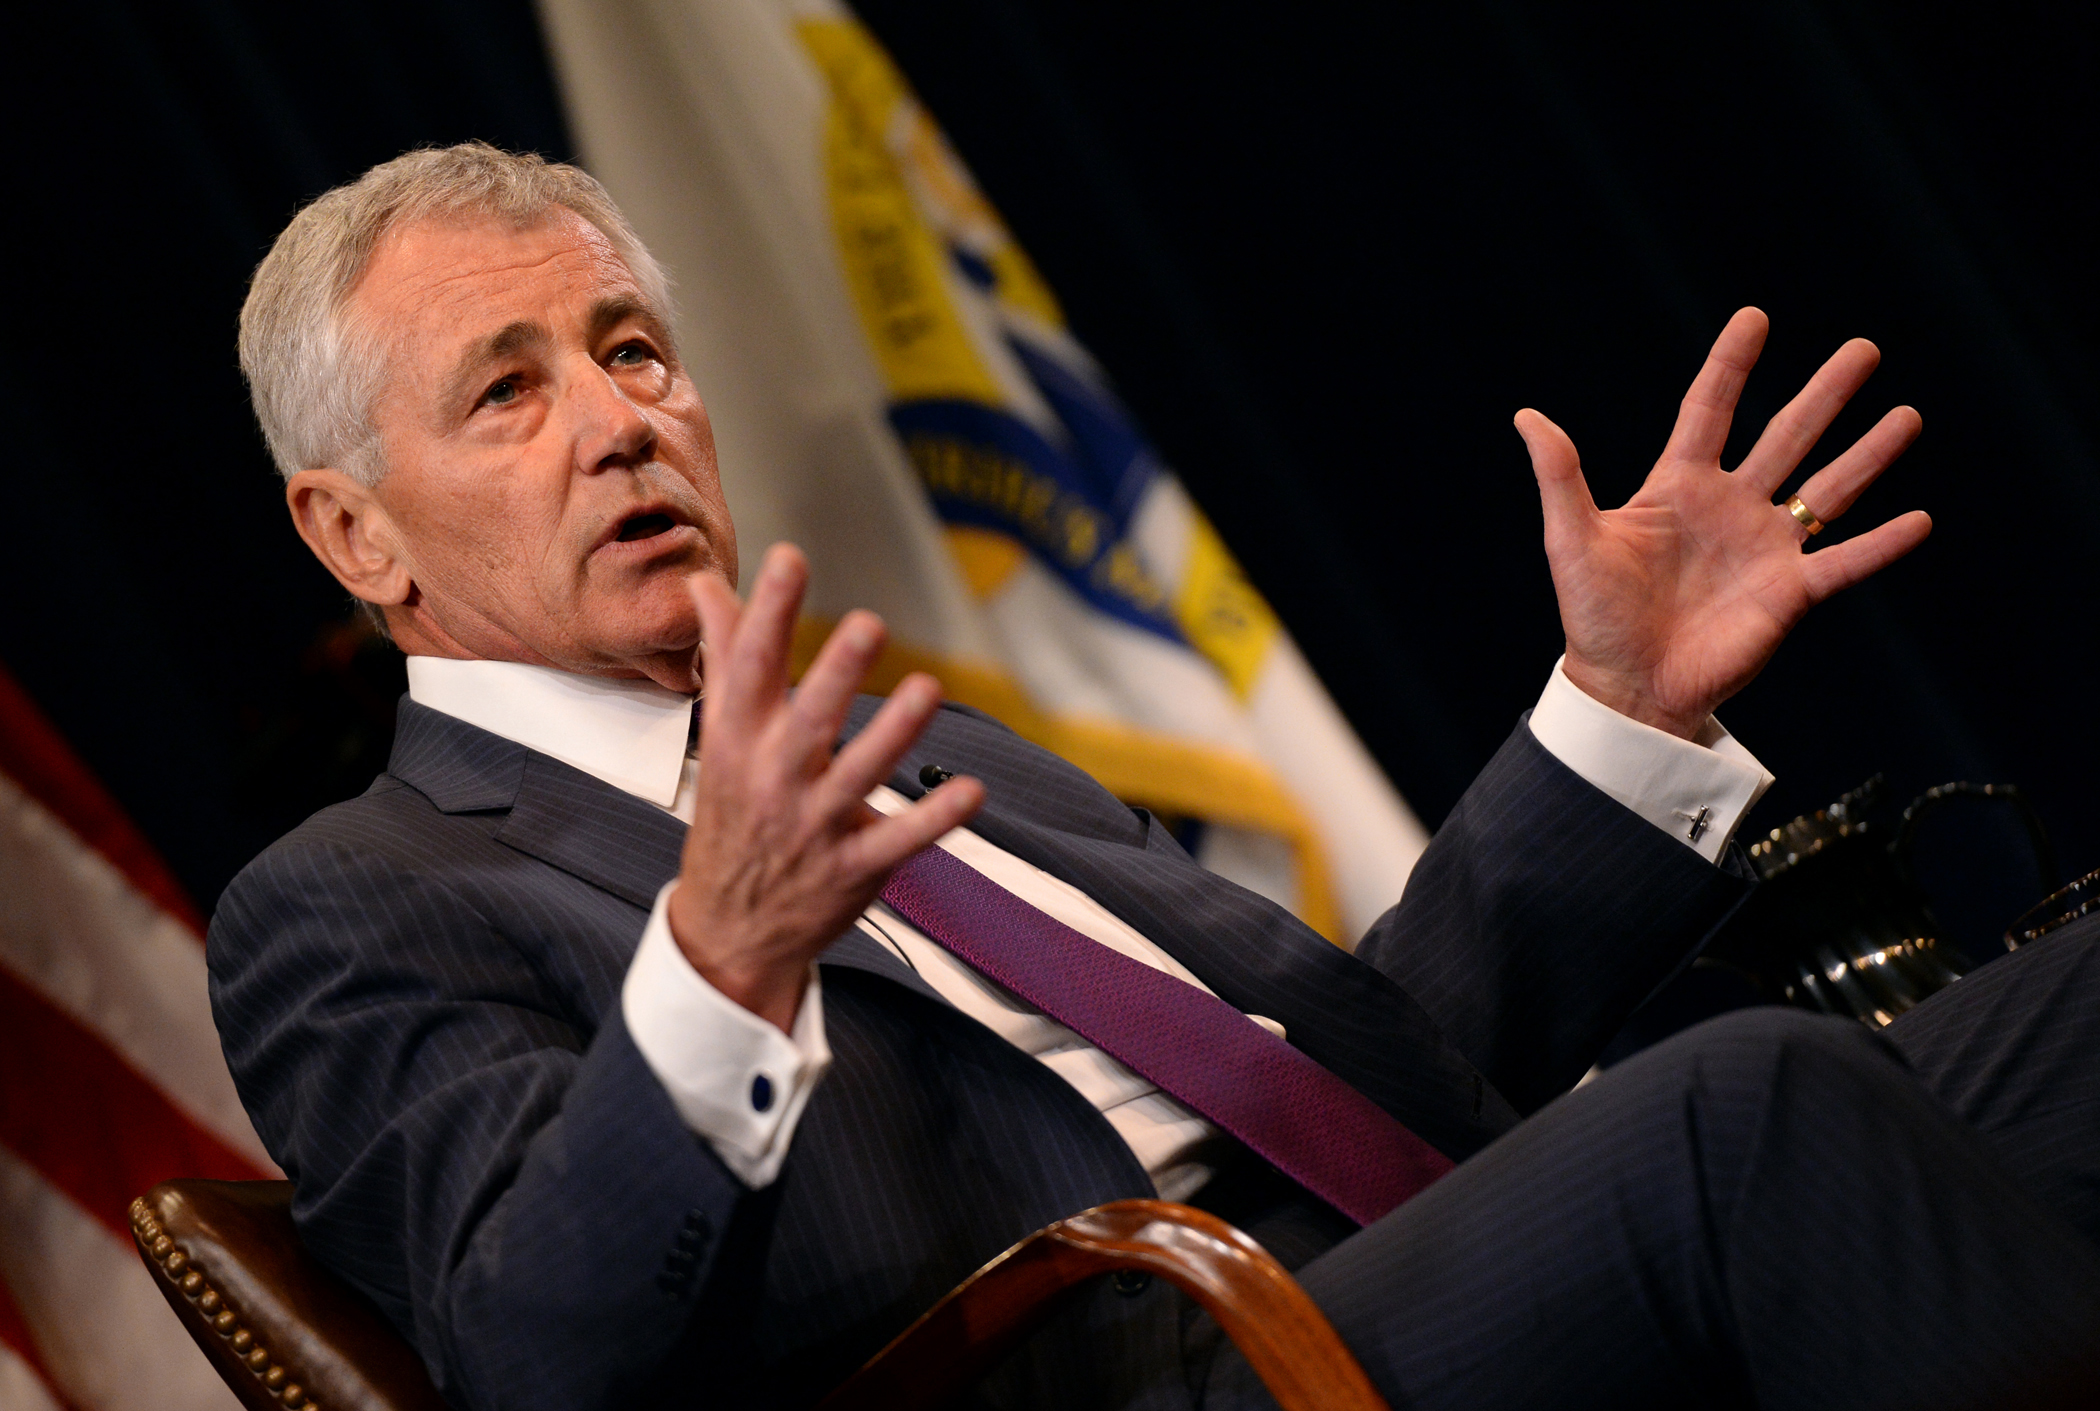 140903-N-PX557-161 NEWPORT, R.I. (Sept. 3, 2014) Secretary of Defense Chuck Hagel discusses current defense department issues during a live interview with Jim Sciutto, chief national security correspondent for CNN, at U.S. Naval War College (NWC) in Newport, R.I. Following the interview, Hagel provided a question and answer session for students, staff and faculty of NWC. Hagel ’s visit to NWC was a planned event during a six-day trip, which includes stops to the 2014 NATO Summit in Wales, Georgia and Turkey. (U.S. Navy photo by Chief Mass Communication Specialist James E. Foehl/Released)